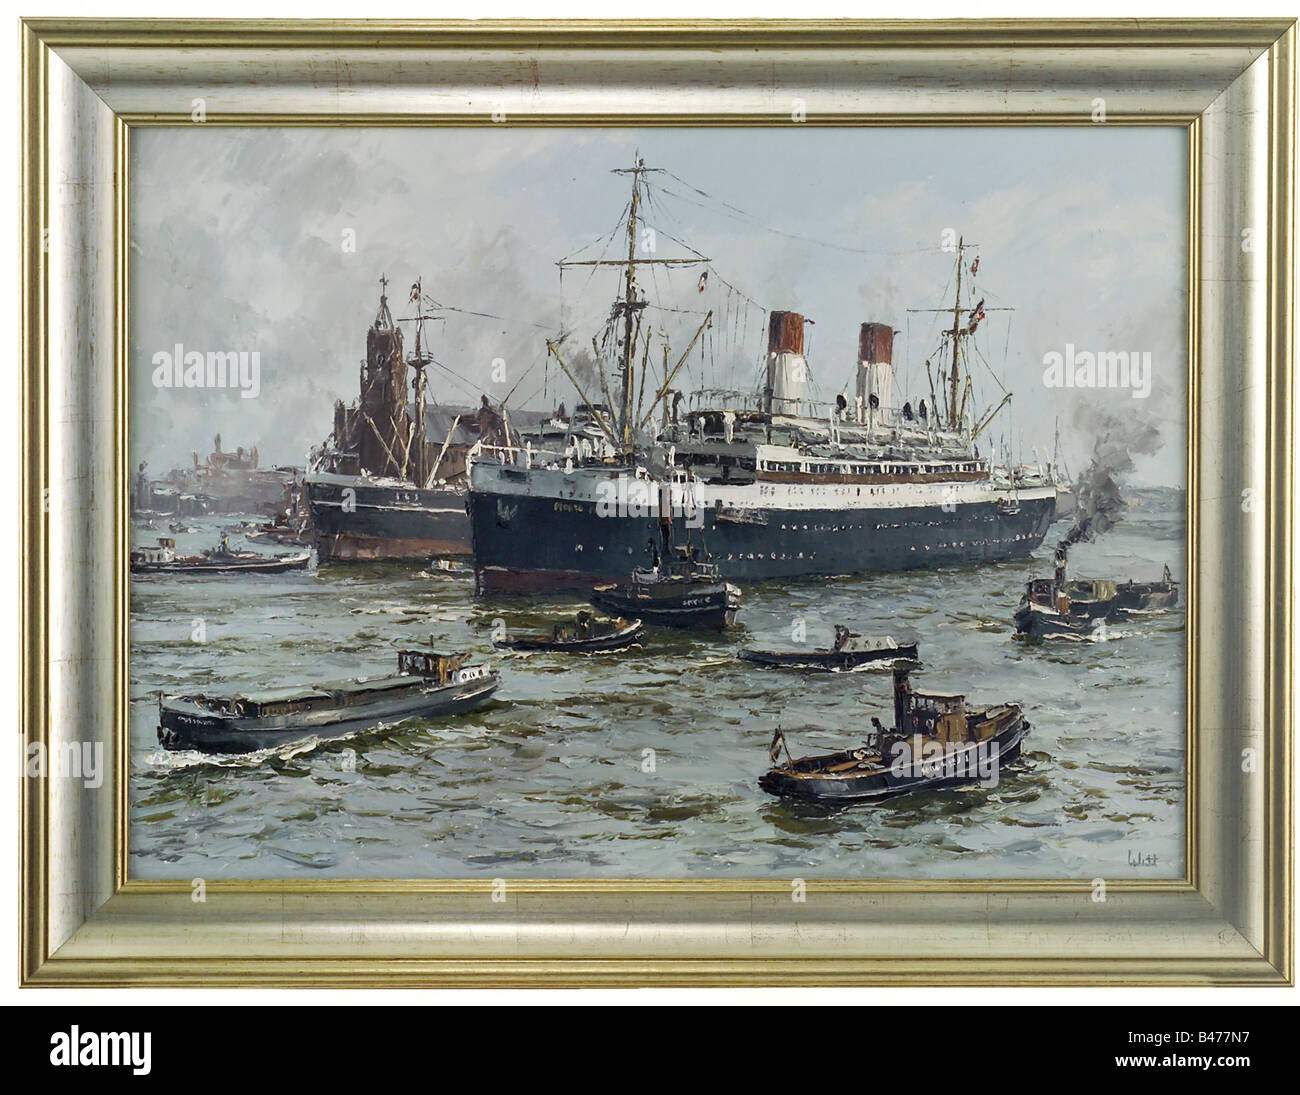 The Monte Pascoal in Hamburg harbour., Oil on canvas. The Monte Pascoal is in the center of the painting surrounded by tugs and lighters. In the left back of it is the bow of anoter ship with a Hamburg harbour scene in the background. Gilded molded frame. Framed dimensions: 82 x 62 cm. Carefully detailed picture of the next to last ship built by Blohm & Voss in the Monte class. It was placed in service in January 1931. fine arts, 1930s, 20th century, navy, naval forces, object, objects, clipping, cut out, cut-out, cut-outs, painting, paintings, ship, , Artist's Copyright has not to be cleared Stock Photo